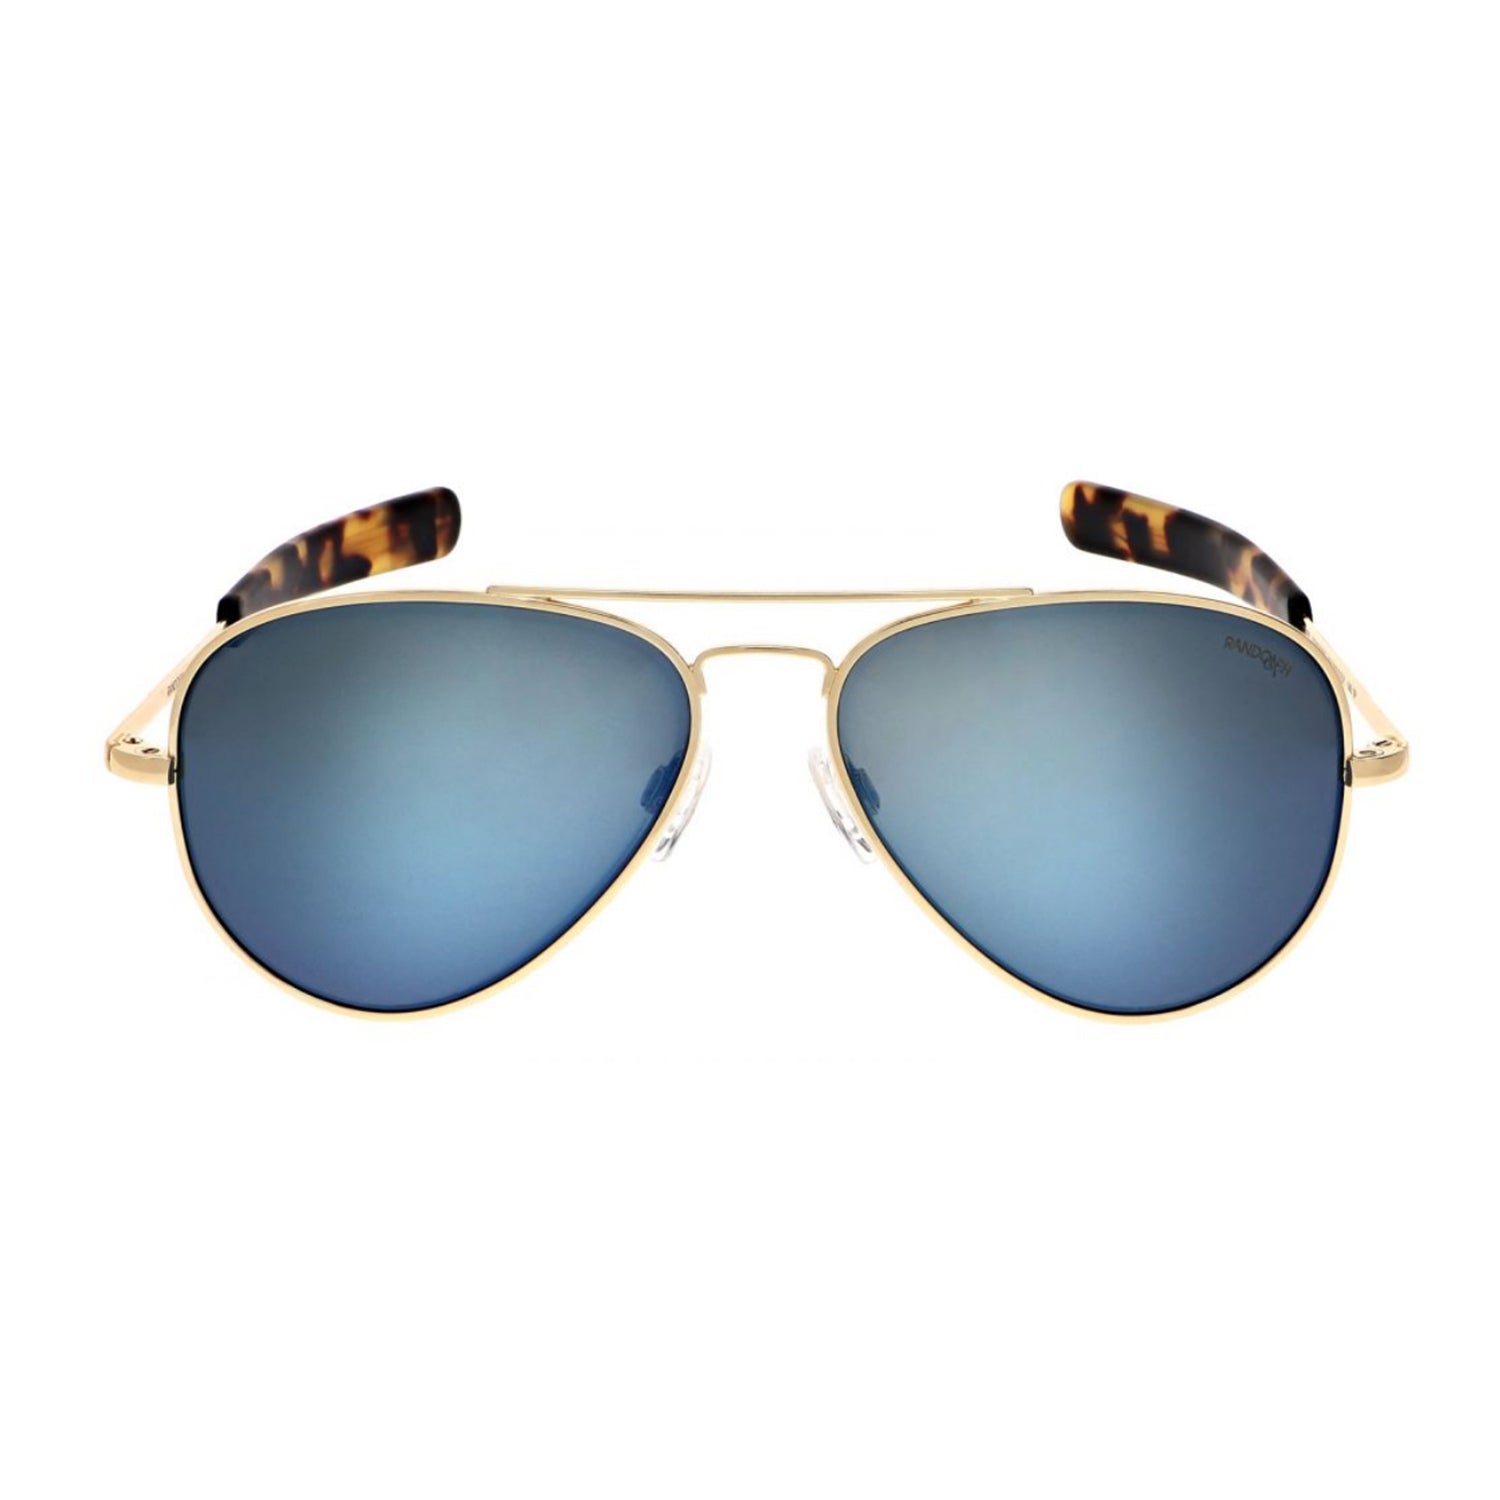 Concorde Aviators, 23k Gold Frames with Cobalt Lenses by Randolph - Talisman Collection Fine Jewelers